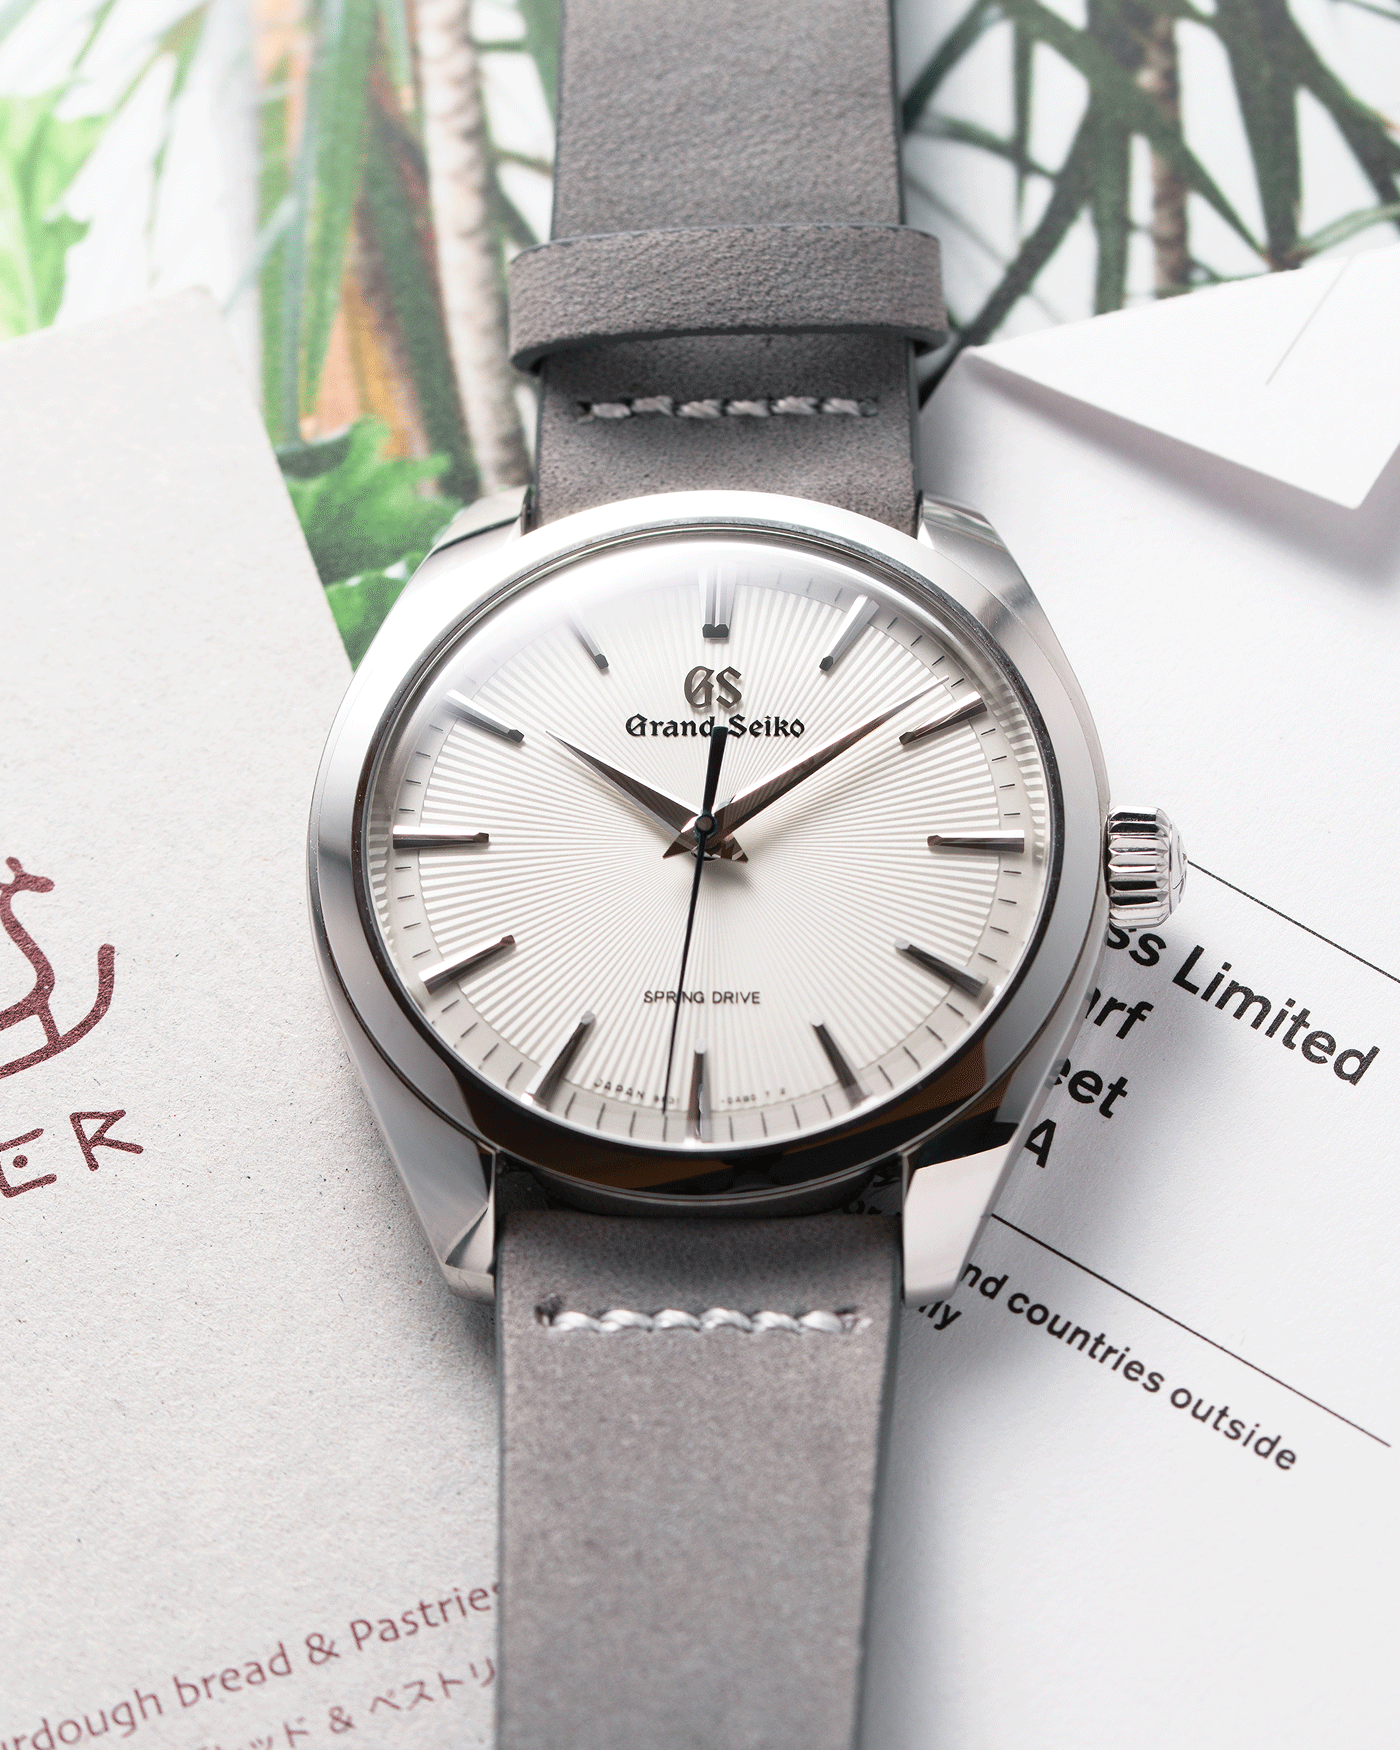 Brand: Grand Seiko Year: 2020 Reference Number: SBGY003 Spring Drive Material: Stainless Steel Movement: Cal 9R31 Case Diameter: 38.5mm Strap: Grey Suede Strap and Original Grand Seiko Black Crocodile Strap with Stainless Steel Deployant